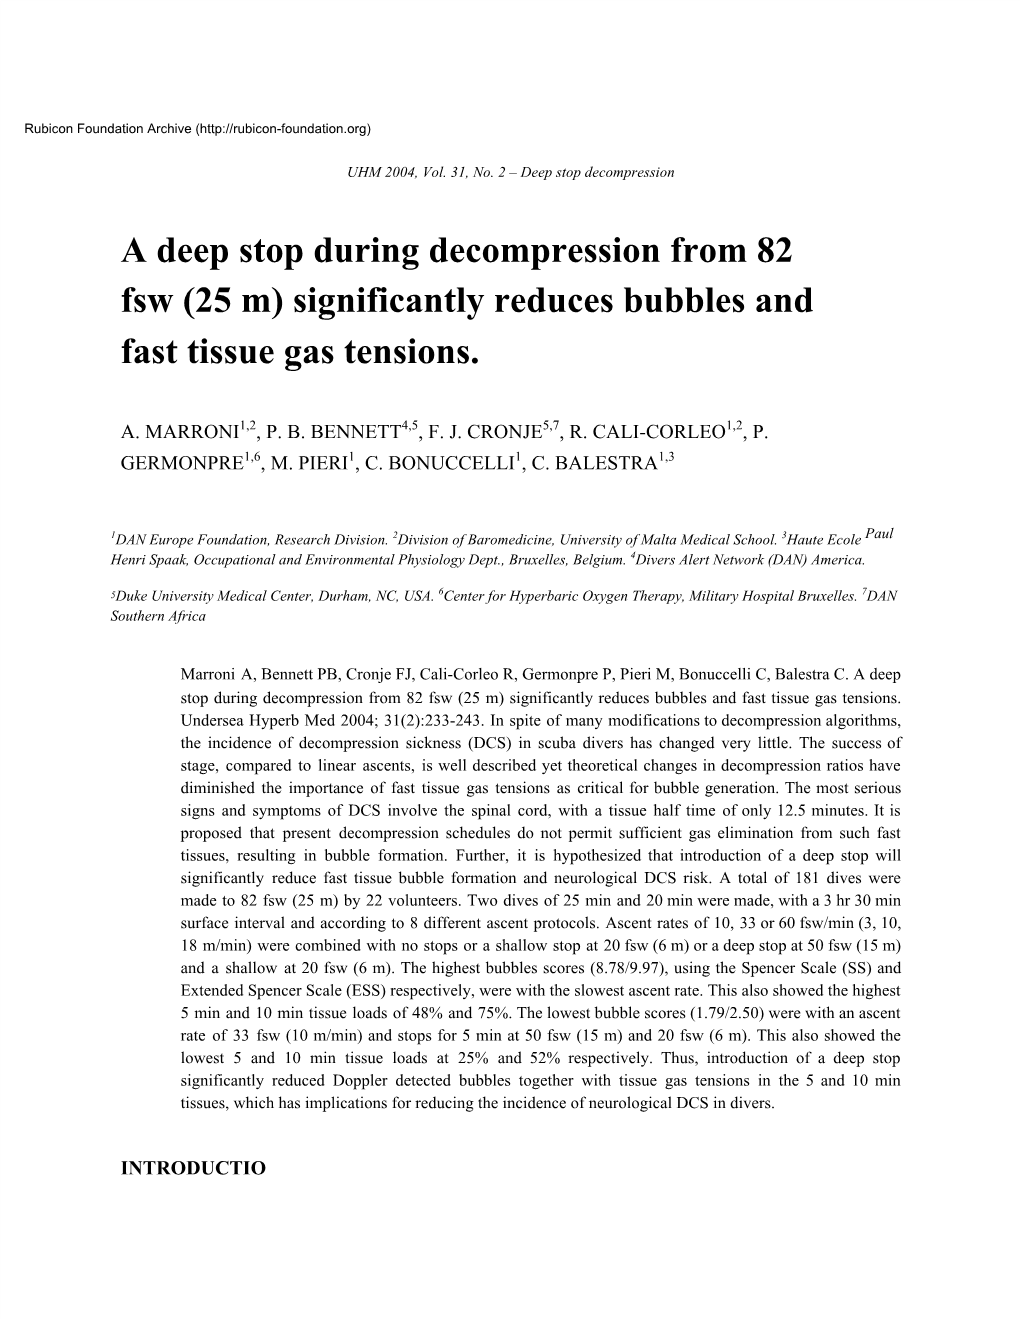 A Deep Stop During Decompression from 82 Fsw (25 M) Significantly Reduces Bubbles and Fast Tissue Gas Tensions